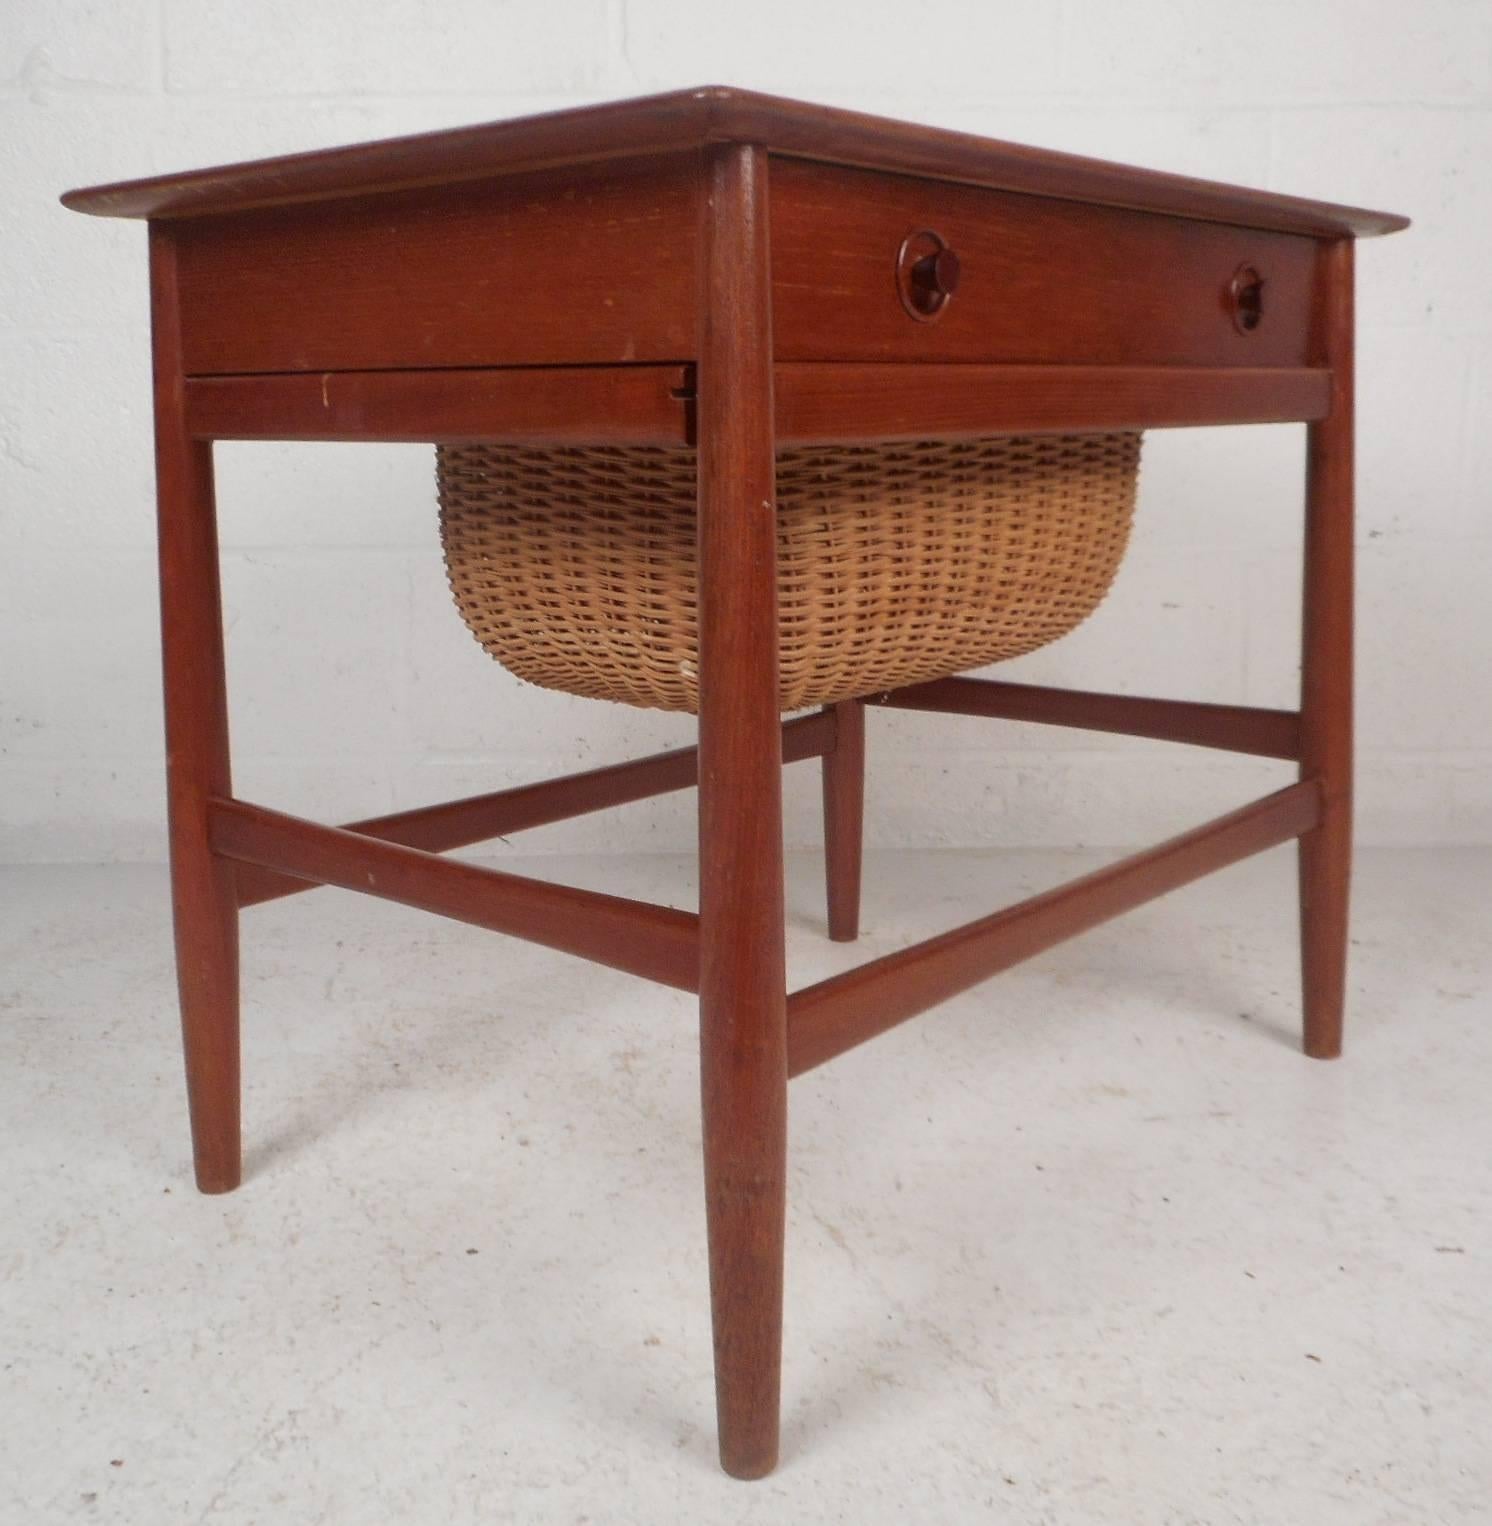 Stunning vintage modern side table features a pull-out woven basket and a large drawer with unique circular pulls. Sleek and sturdy design with stretchers in between each tapered leg. Beautiful teak wood grain and a finished back add to the allure.